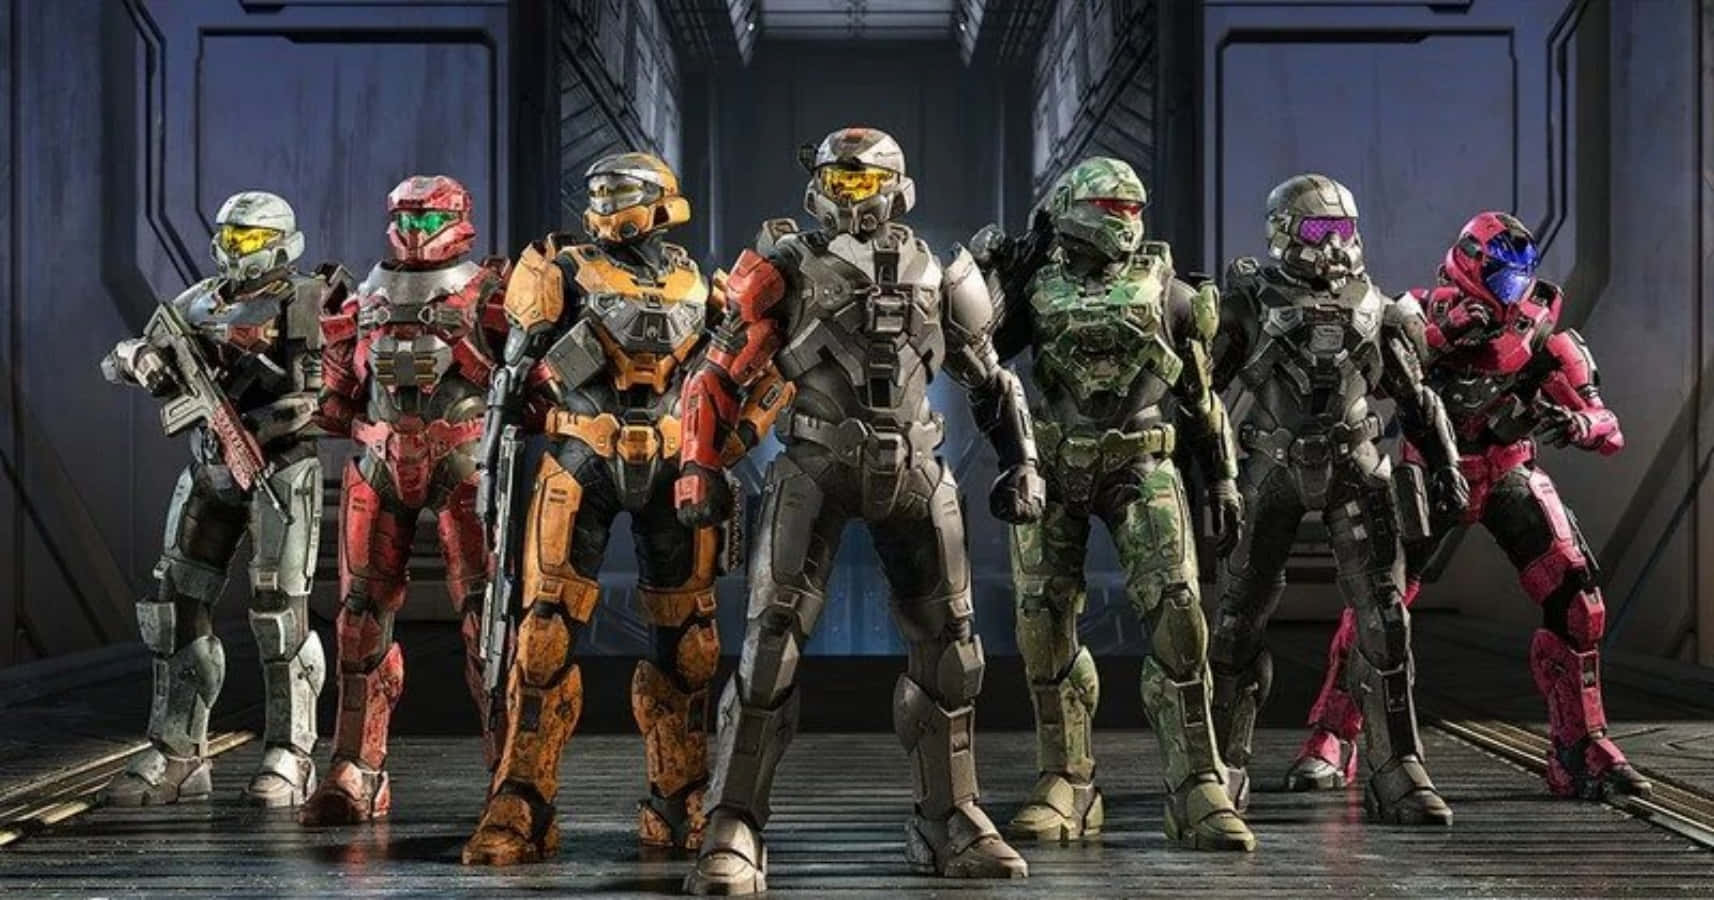 Halo Spartans ready for battle Wallpaper